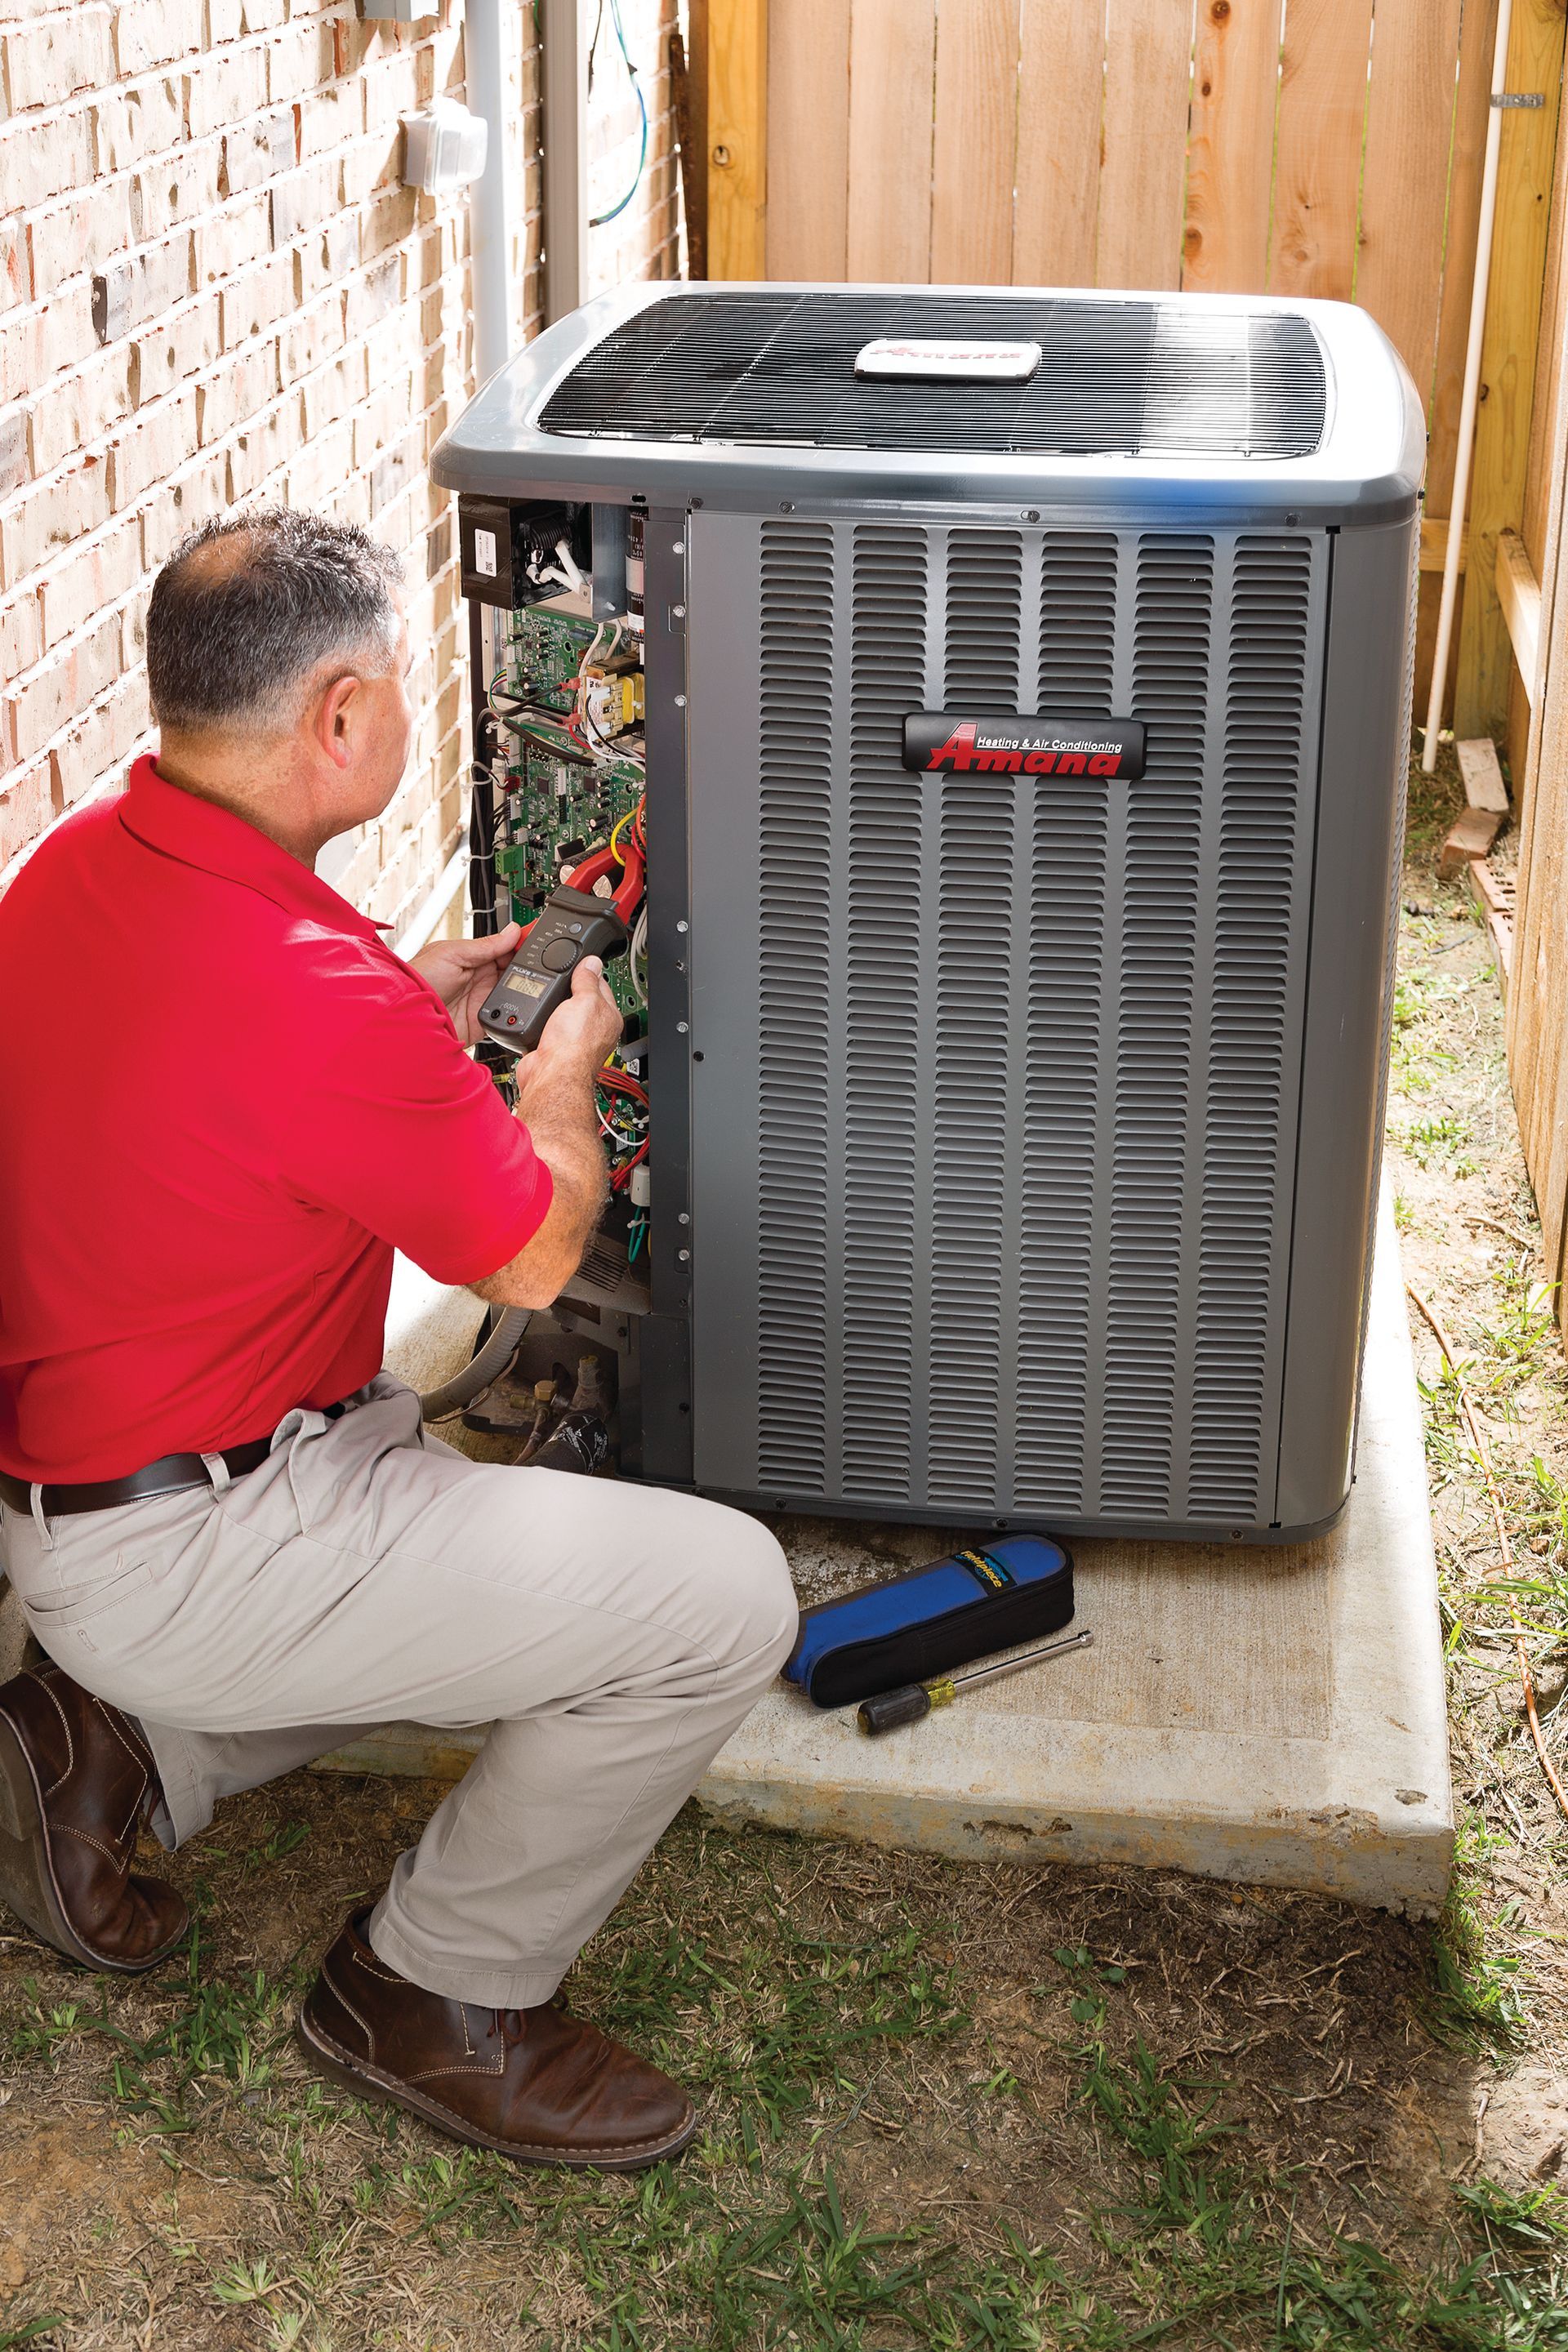 Repairing Air Conditioner — North Versailles, PA — A & P Furnace Co